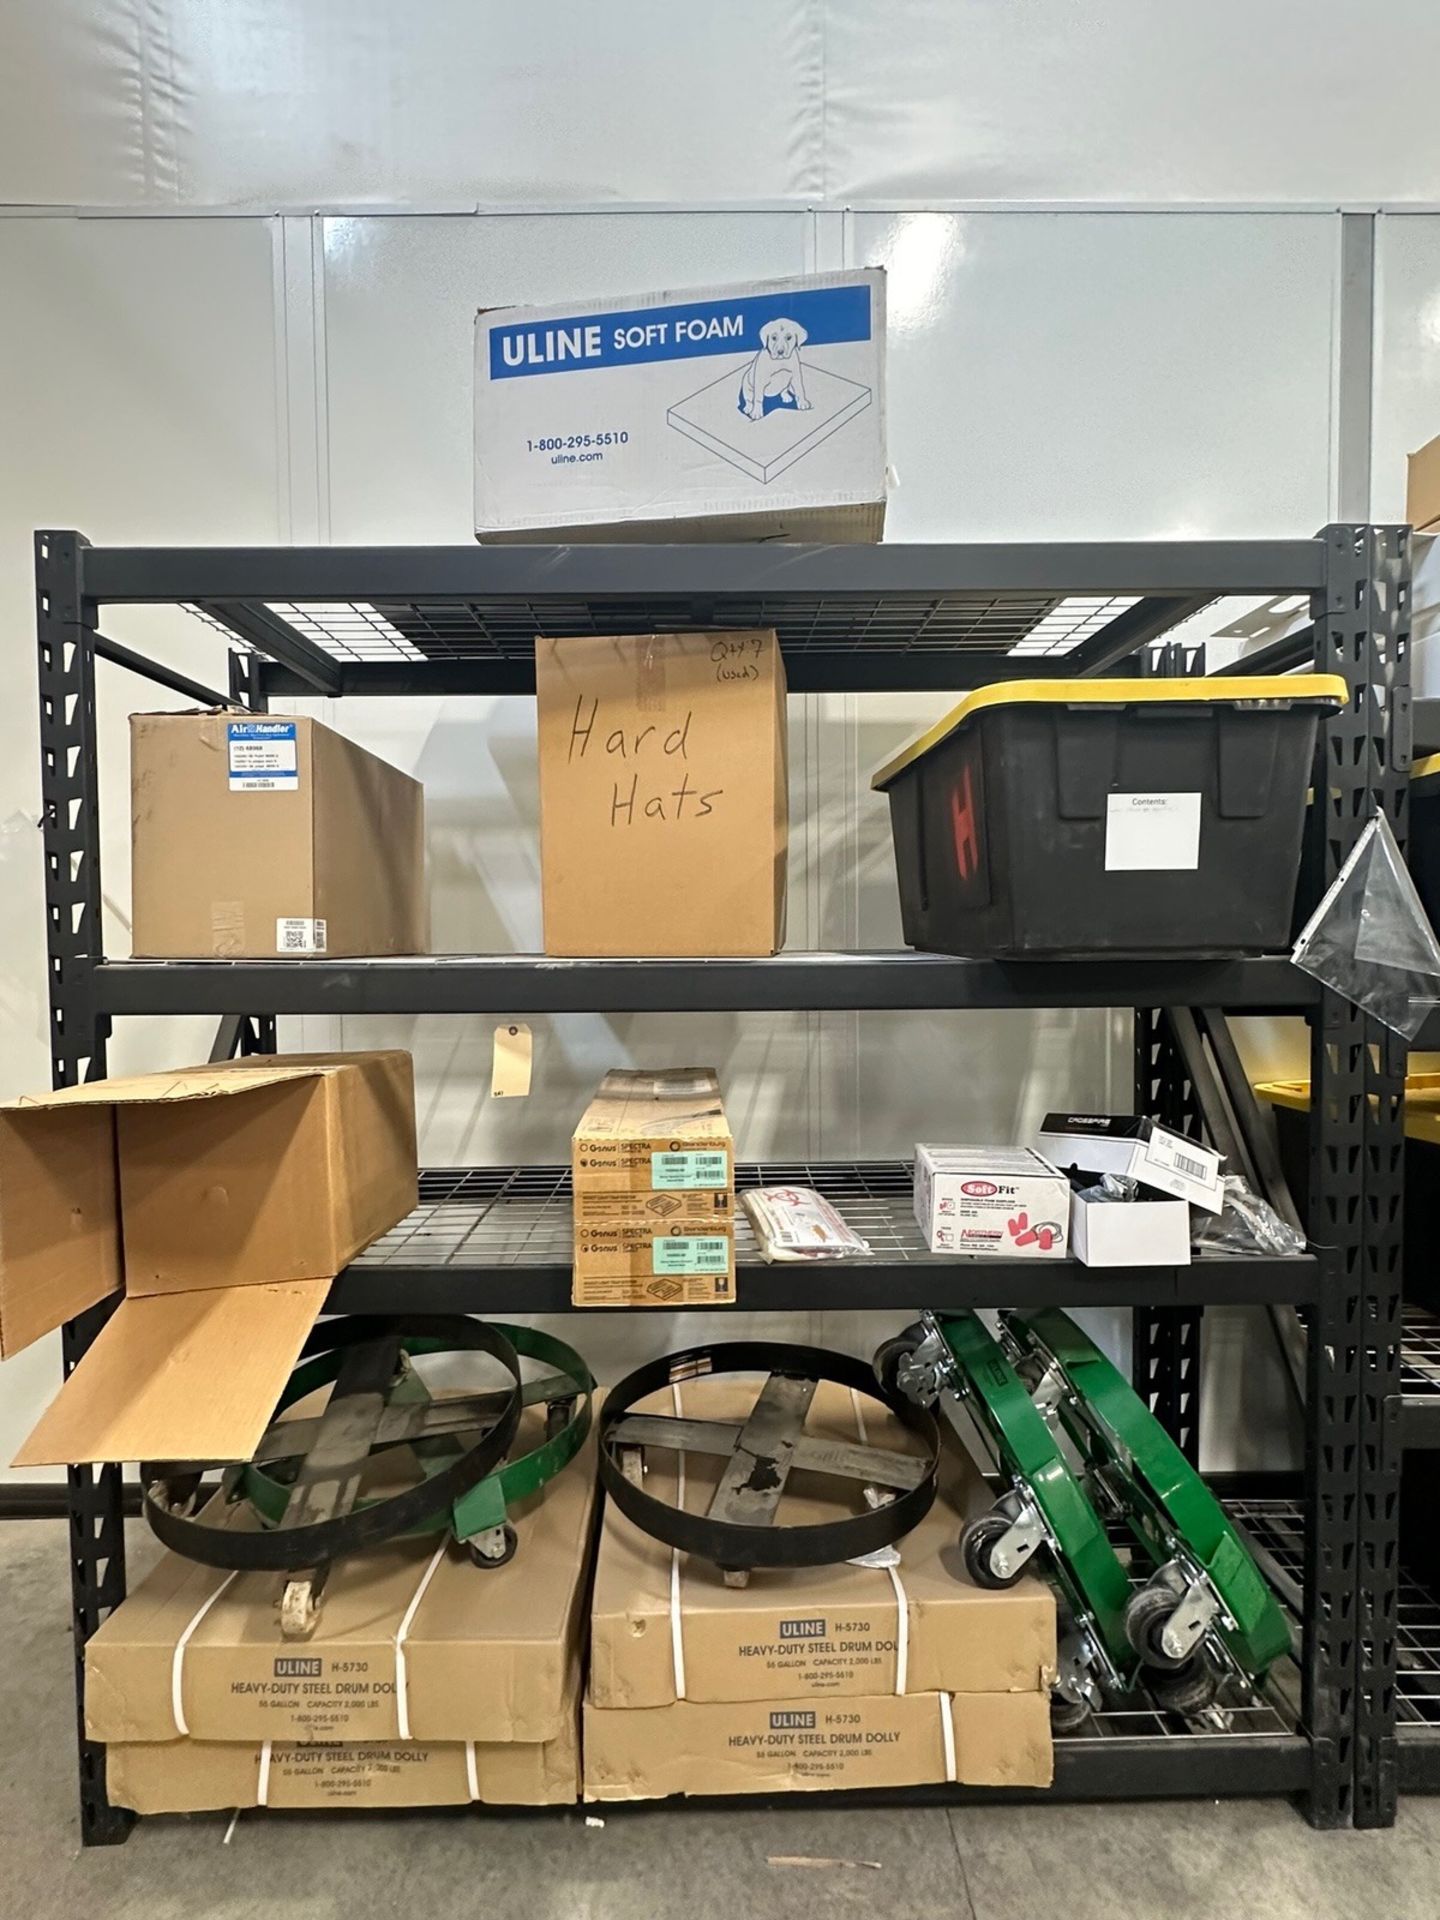 Lot of 5 Shelves No Contents | Rig Fee $300 - Image 2 of 5